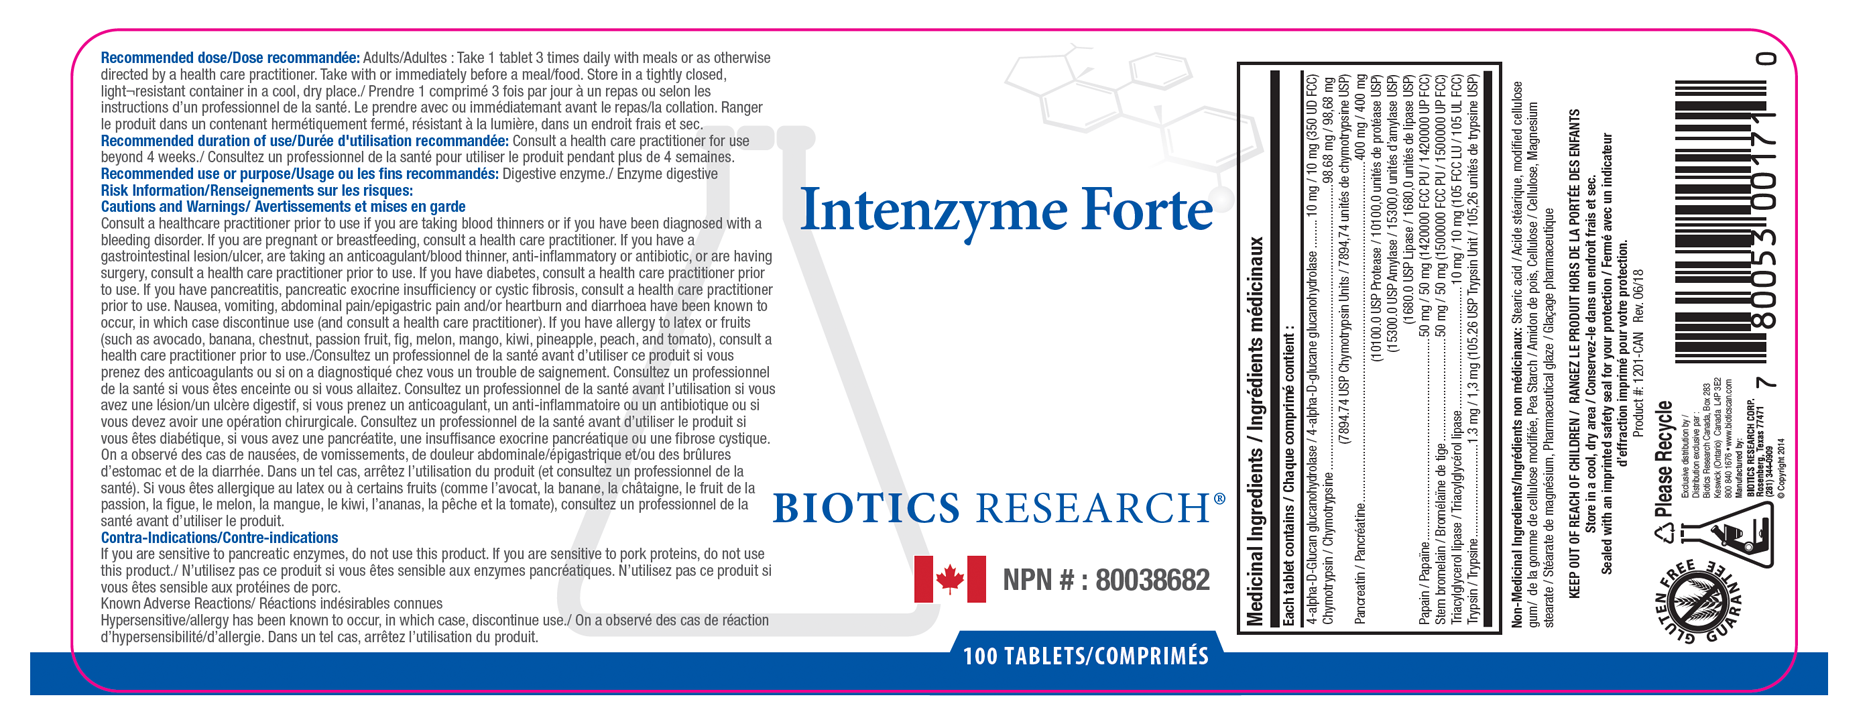 Intenzyme Forte 100 Tablets - Label